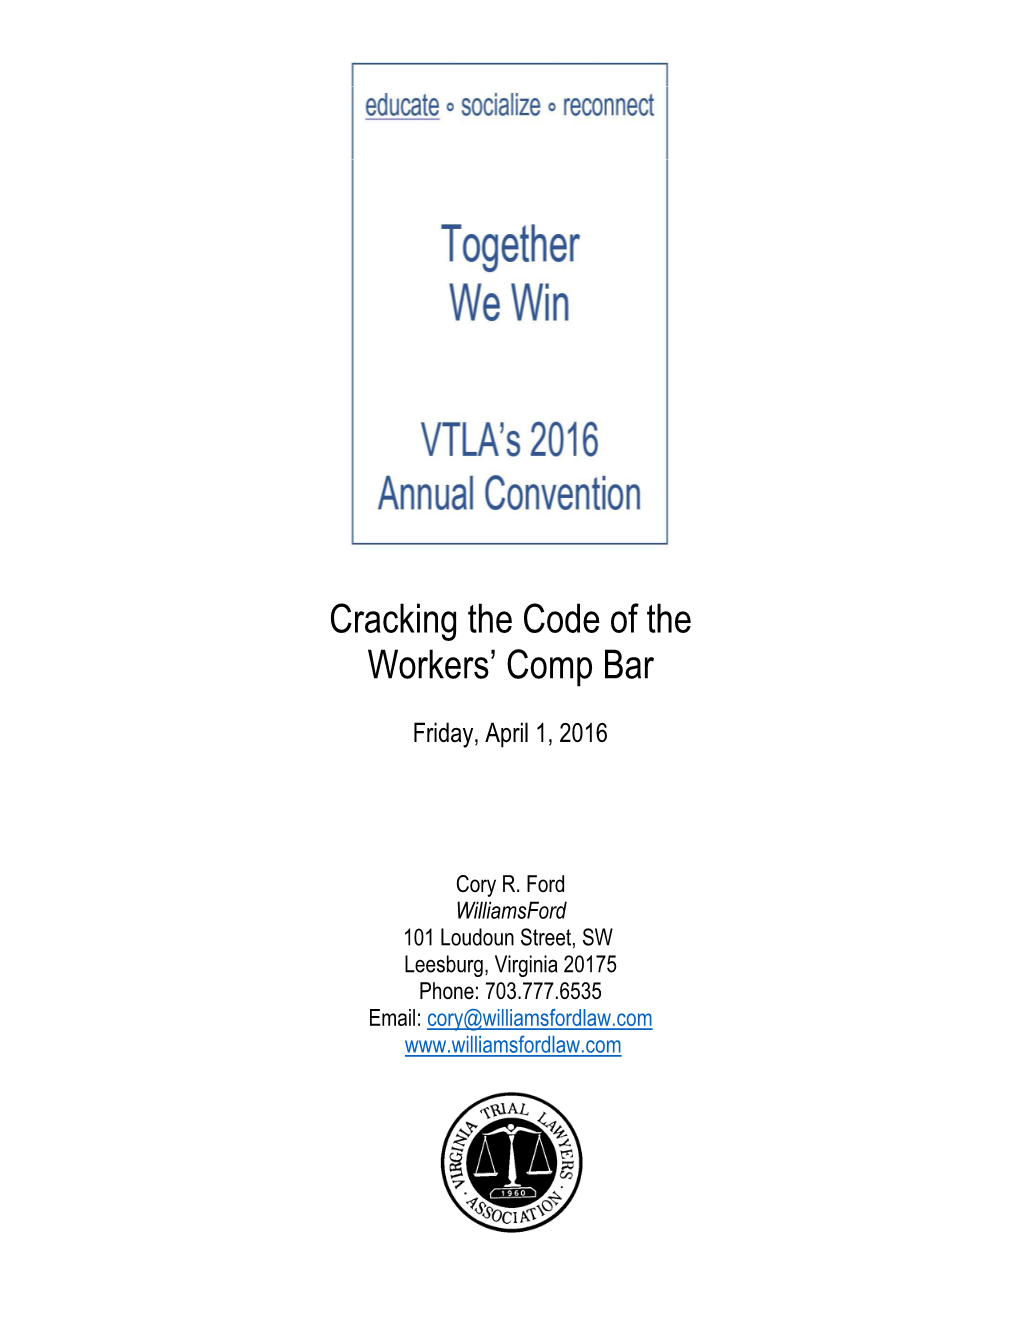 Cracking the Code of the Workers' Comp